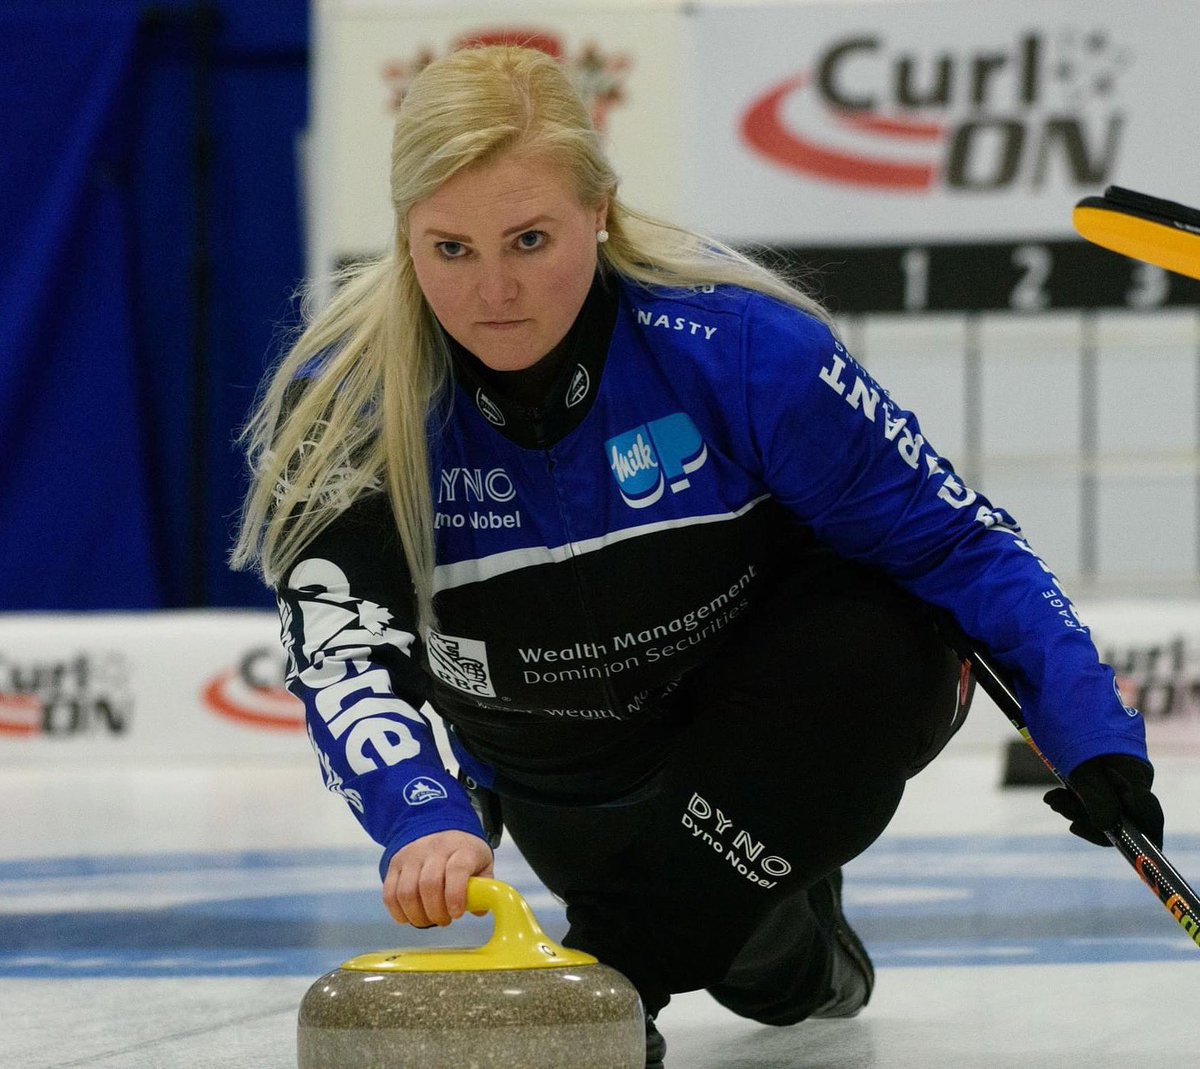 It’s game day! Our 1 vs 2 page playoff game will be a rematch against Team Carly Howard at 2:30pm! Watch live on CurlON TV! We will be the featured game with full commentary! #OntarioScotties #MilkEveryMoment #SeeWhatSheCanDo 
📺: youtube.com/@sheet_0465?si…
📸: @SeeWhatSheCanDo